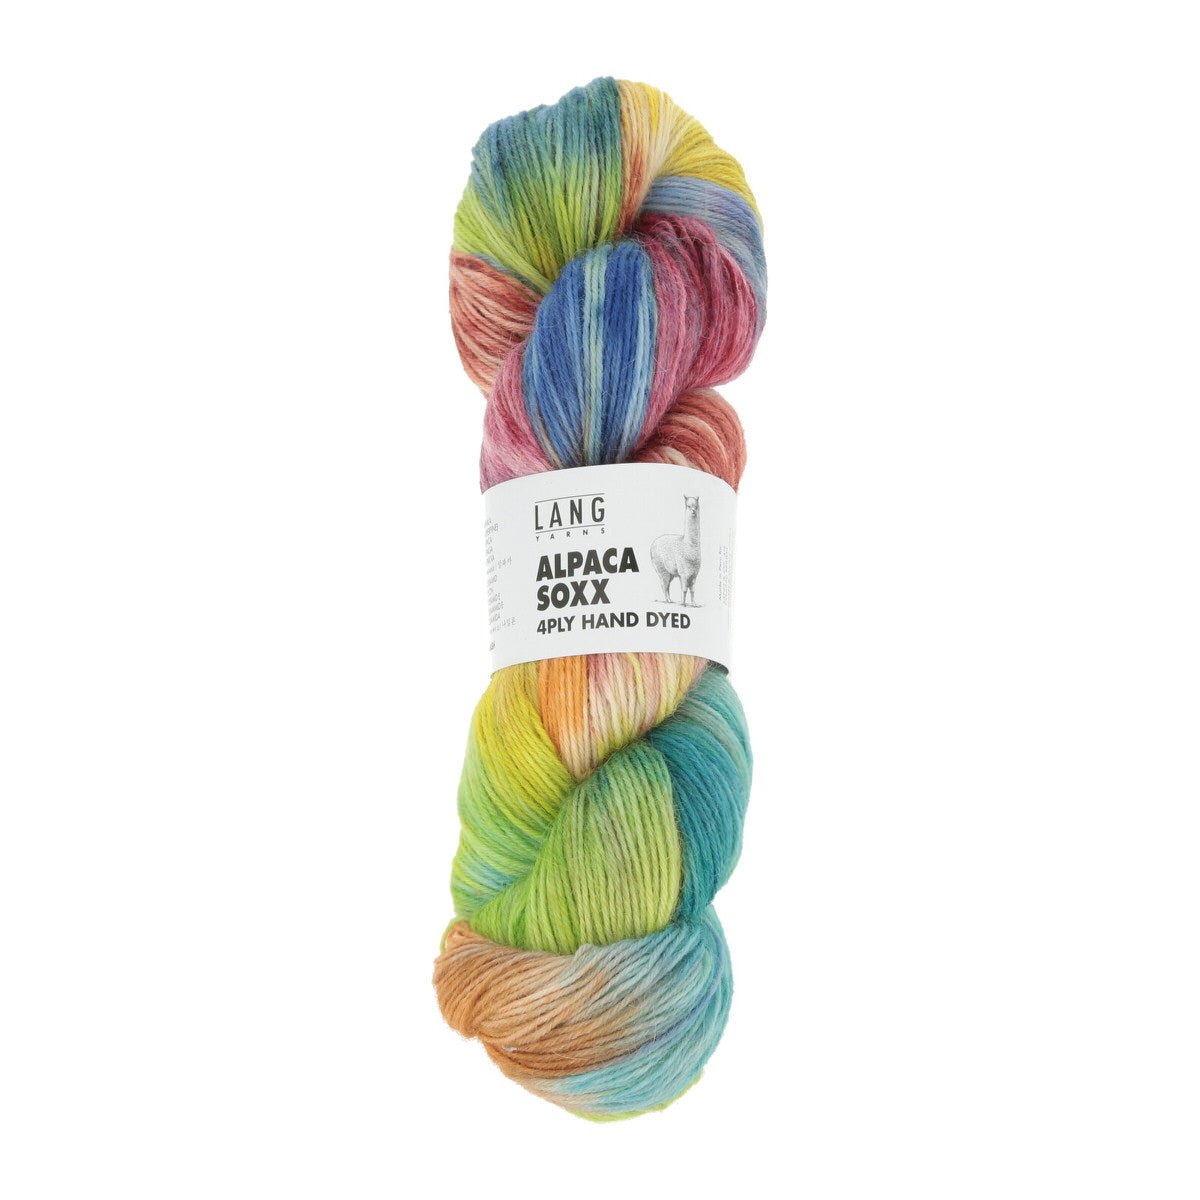 ALPACA SOXX 4-FACH/4-PLY HAND DYED 1132.0002 - Lang